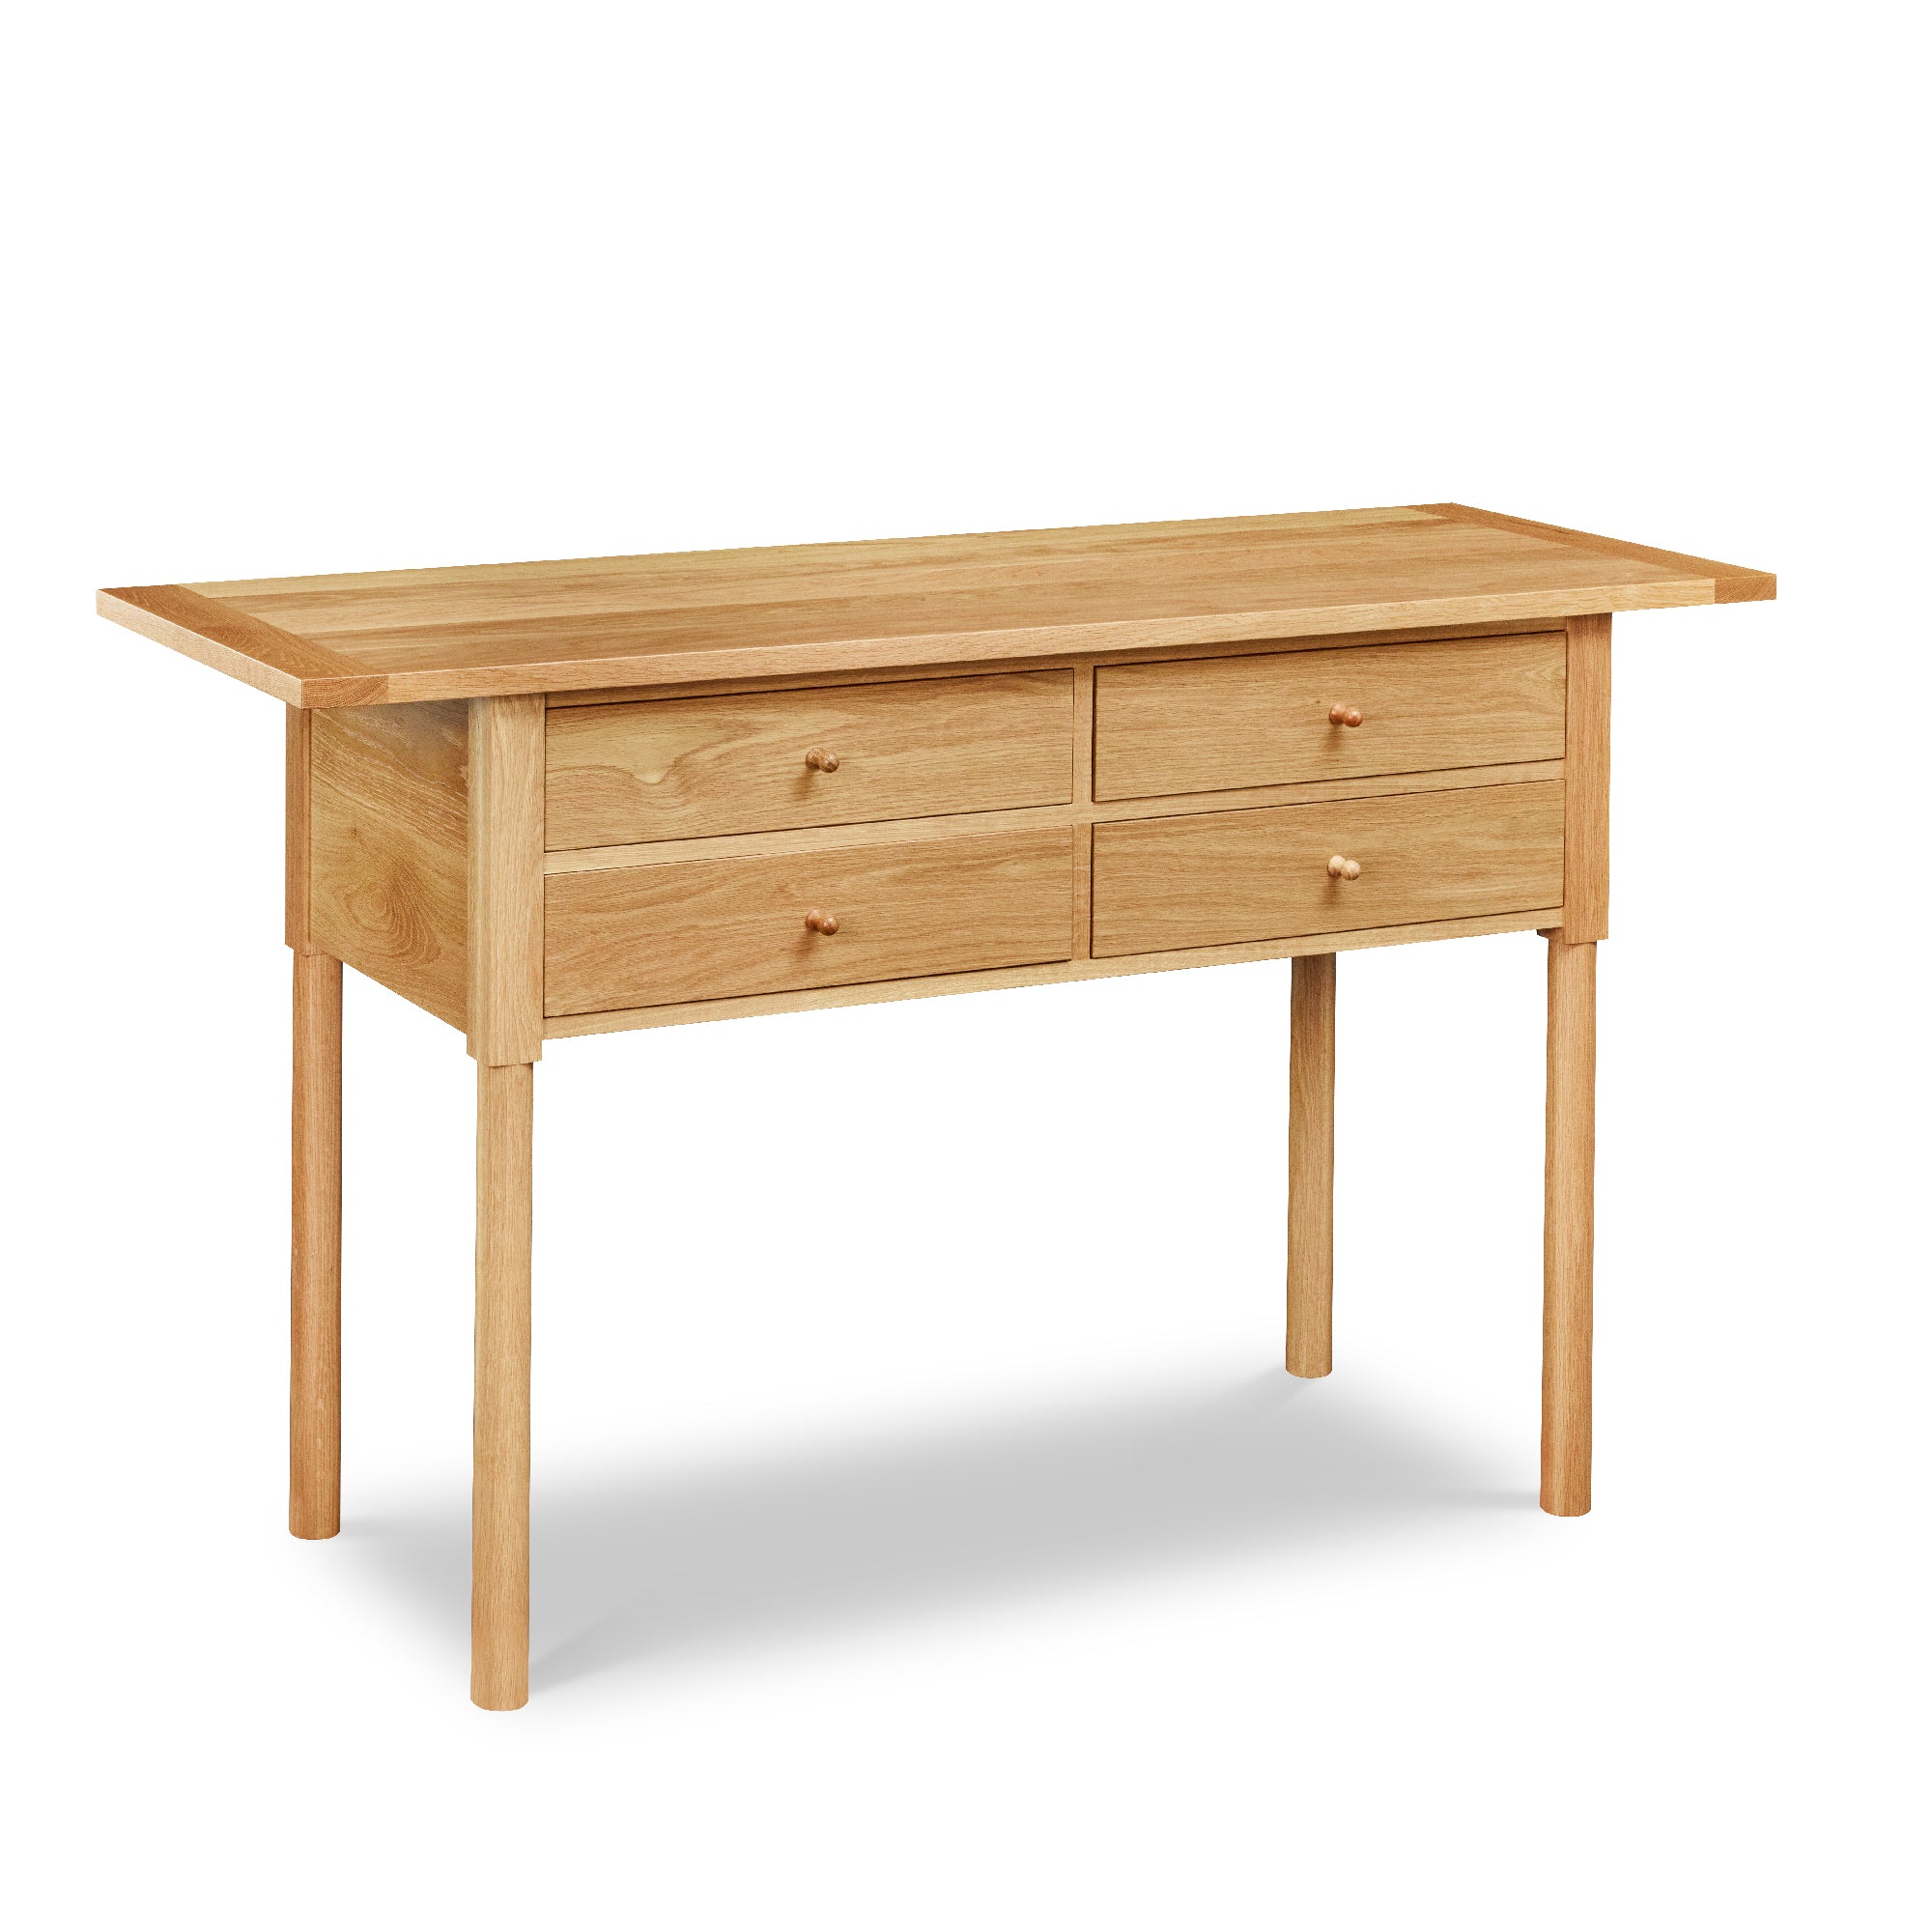 Modern Revelry sideboard with straight turned legs and breadboard ends, built in solid white oak